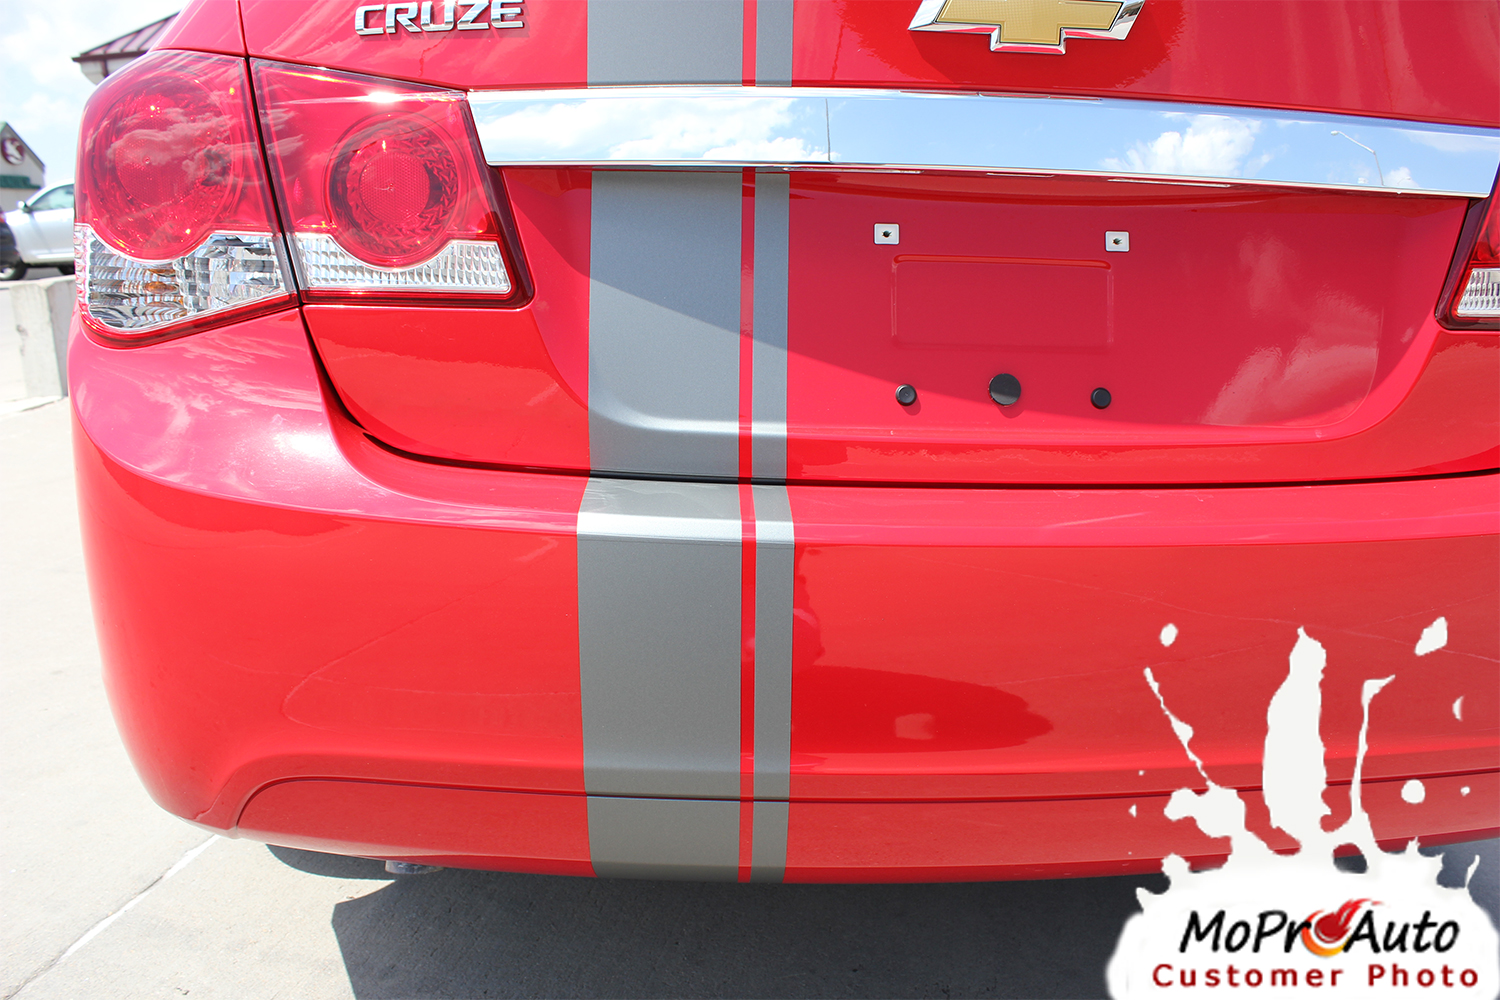 Chevy Cruze RALLY STRIPES Vinyl Graphics, Stripes and Decals Set